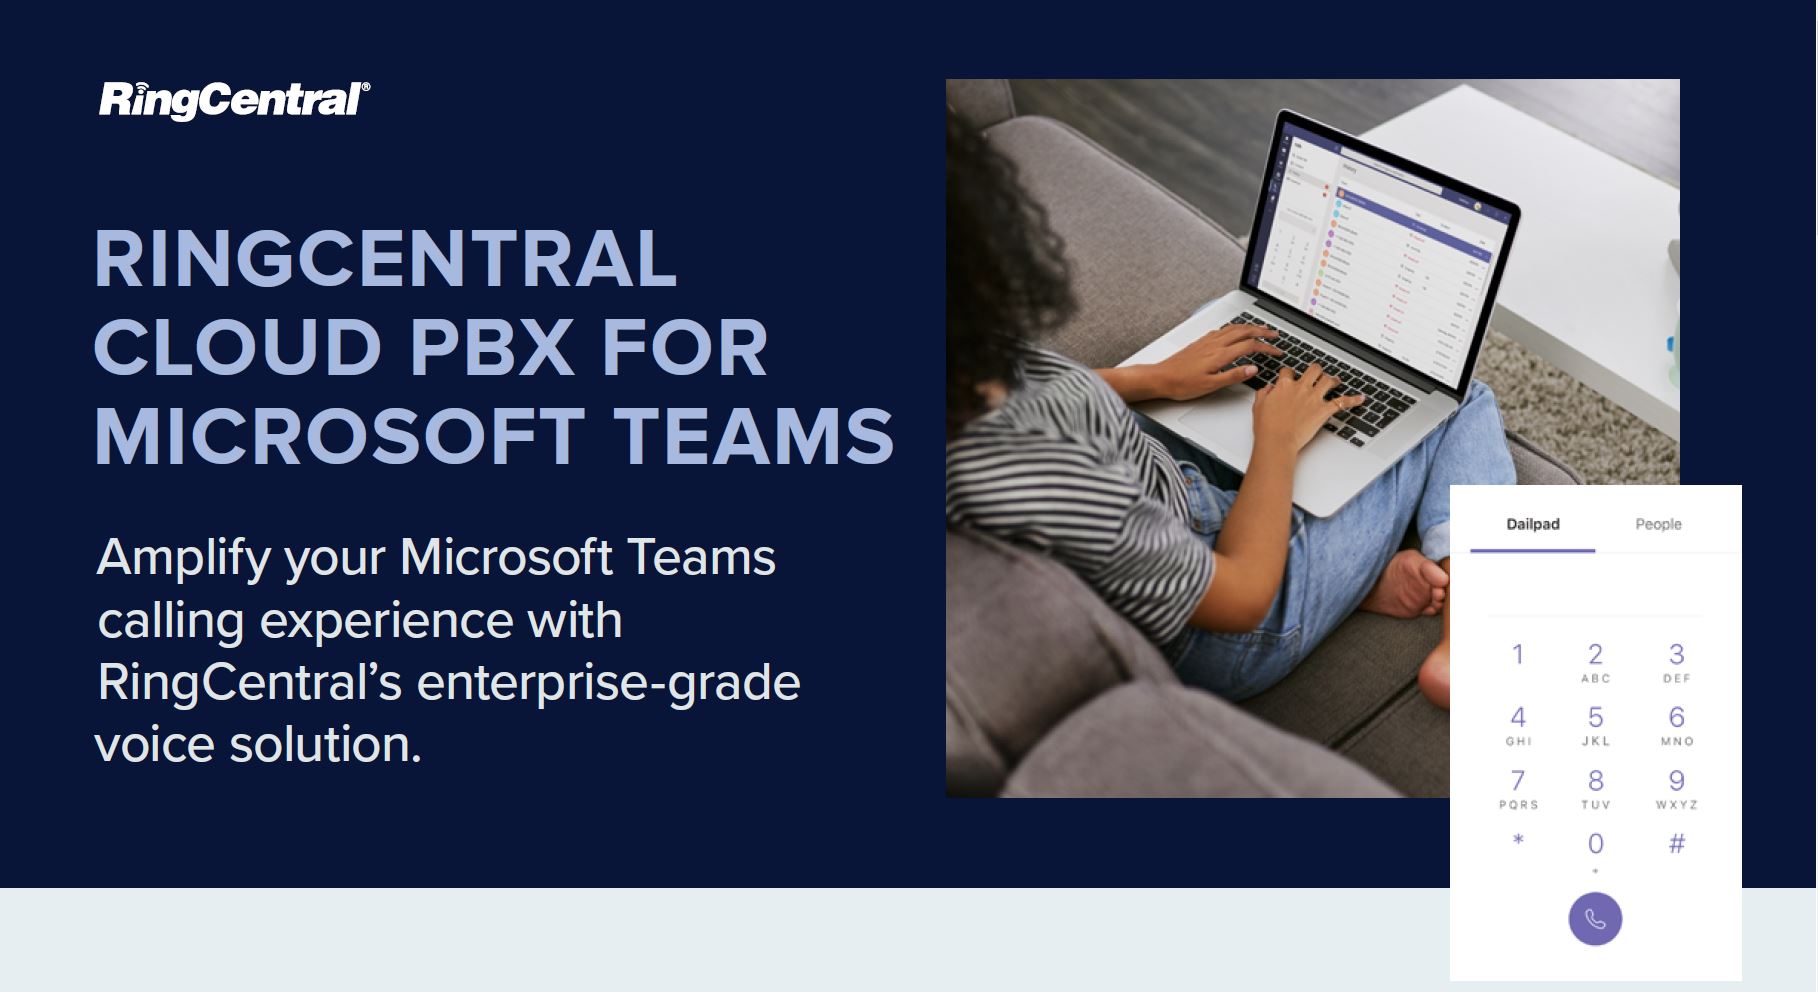 Article RingCentral Cloud PBX for Microsoft Teams Image